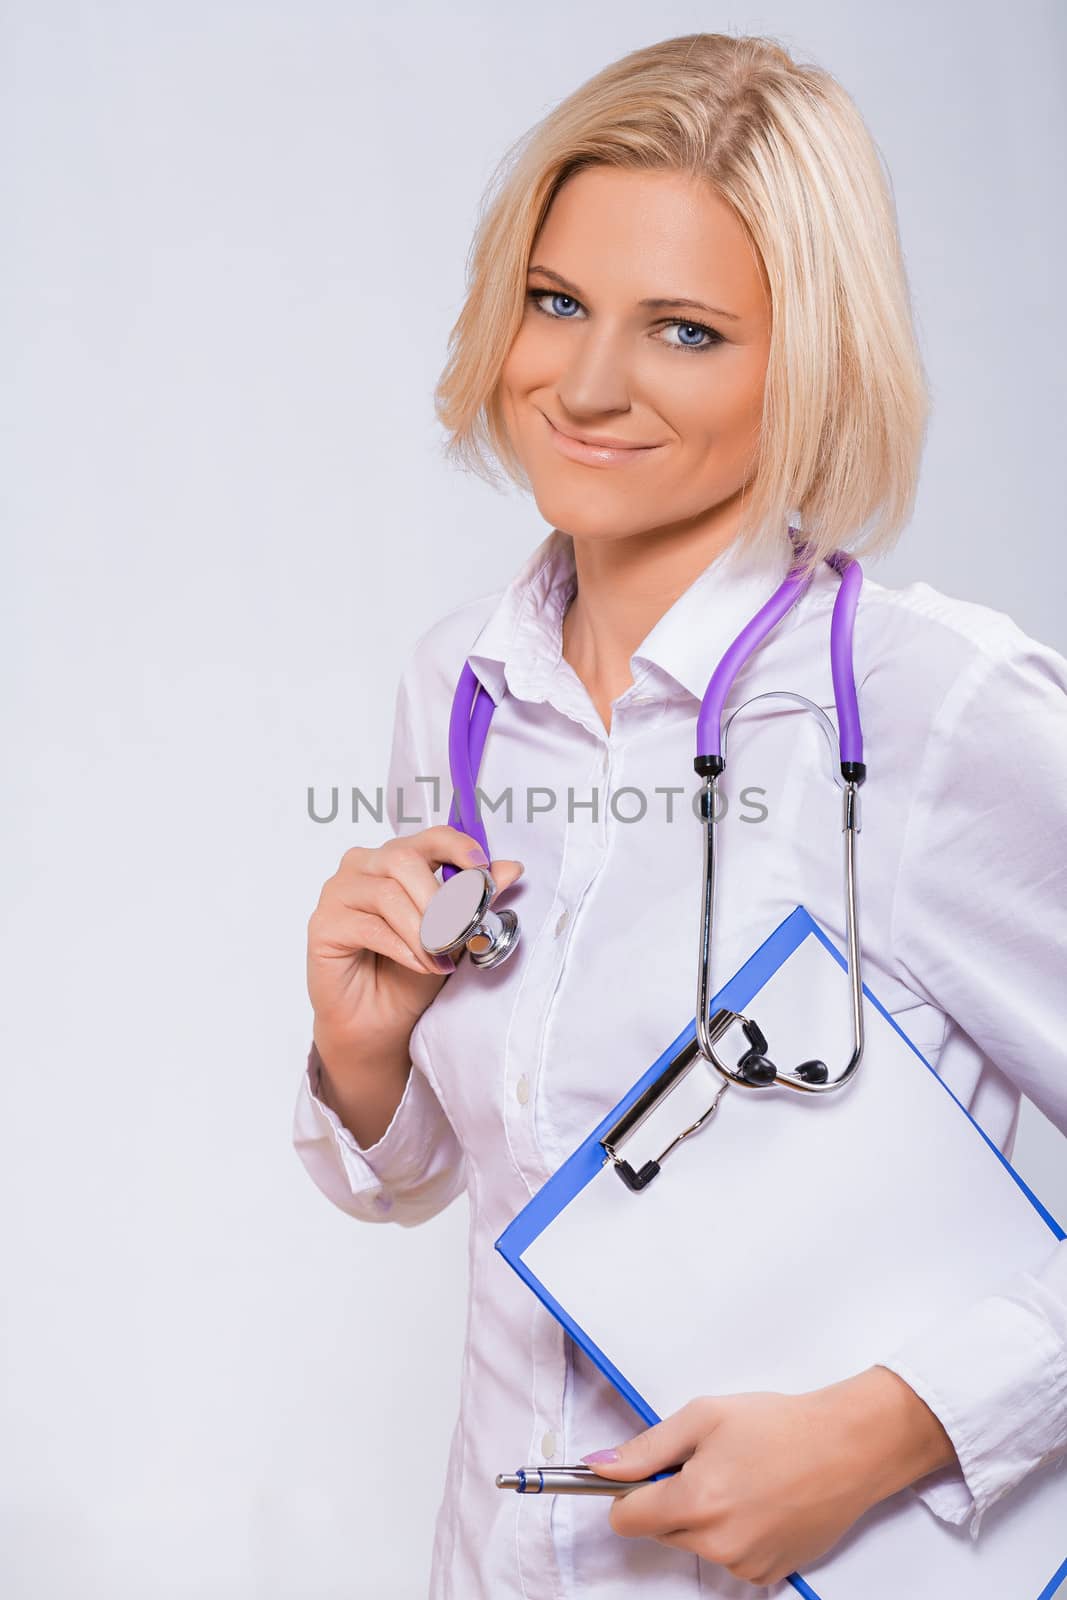 smiling medical woman doctor